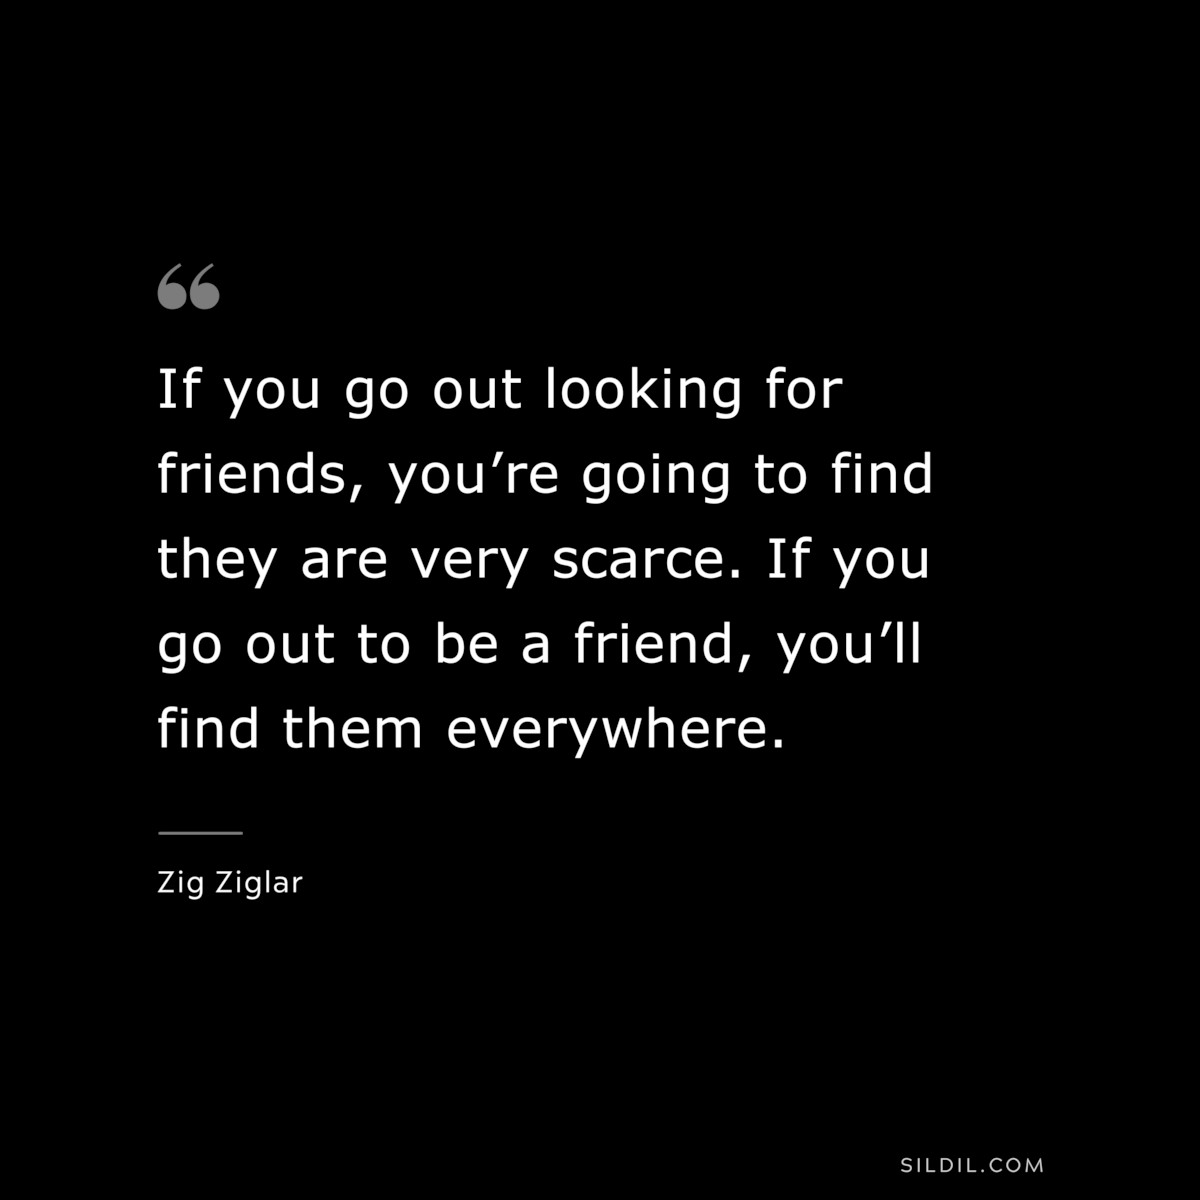 If you go out looking for friends, you’re going to find they are very scarce. If you go out to be a friend, you’ll find them everywhere. ― Zig Ziglar